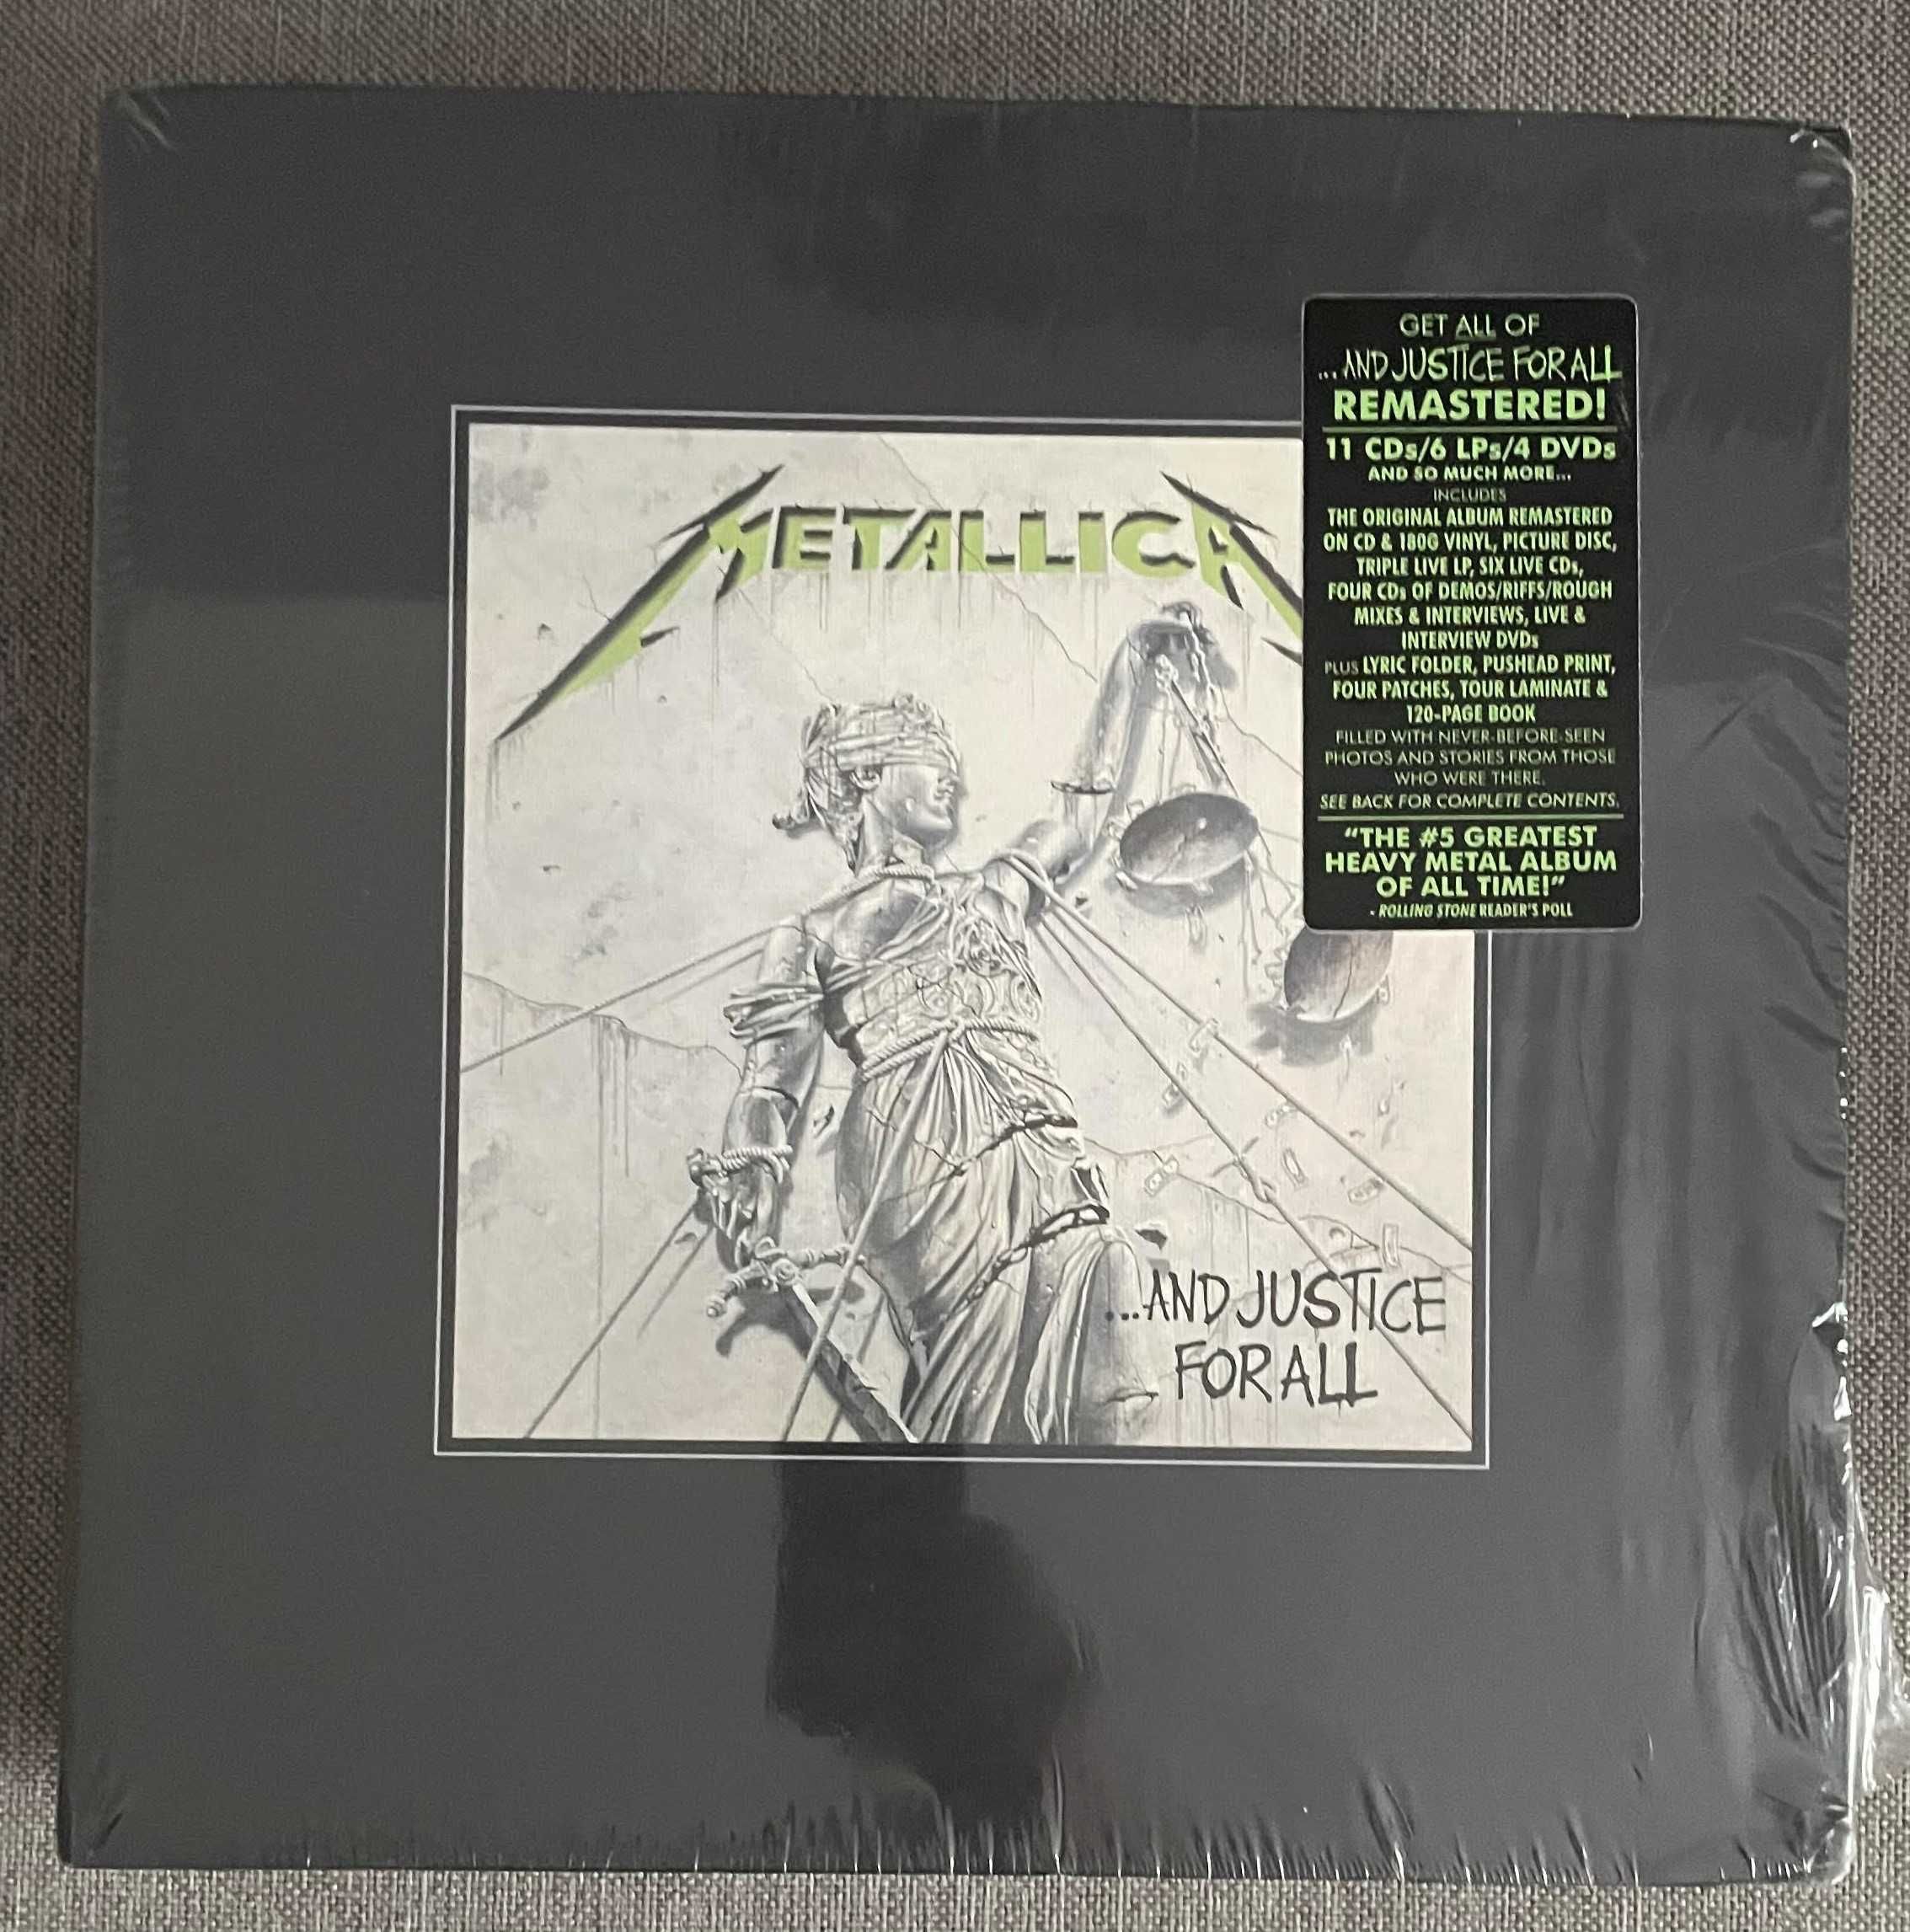 Metallica ...and Justice for All [Remastered] Deluxe Box Set